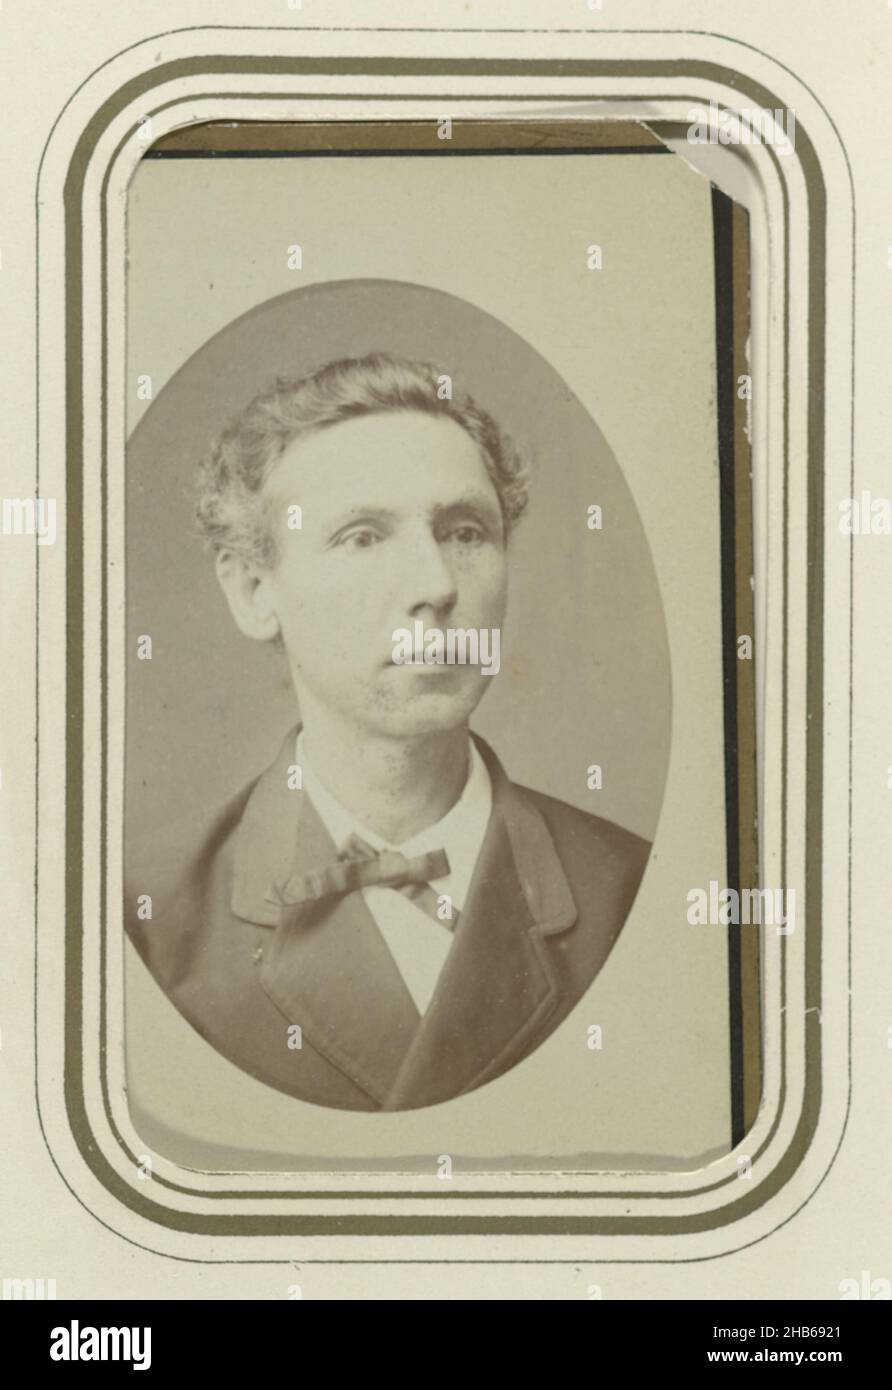 Man portrait, Carte-de-visite with the portrait of an unknown man. Probably one of the providers of the photo album. Inserted in the photo album offered to J.M. Pijnacker Hordijk upon his departure from Jogyakarta in 1886., anonymous, Dutch East Indies, The (possibly), 1880 - 1886, photographic support, height 88 mm × width 53 mm Stock Photo